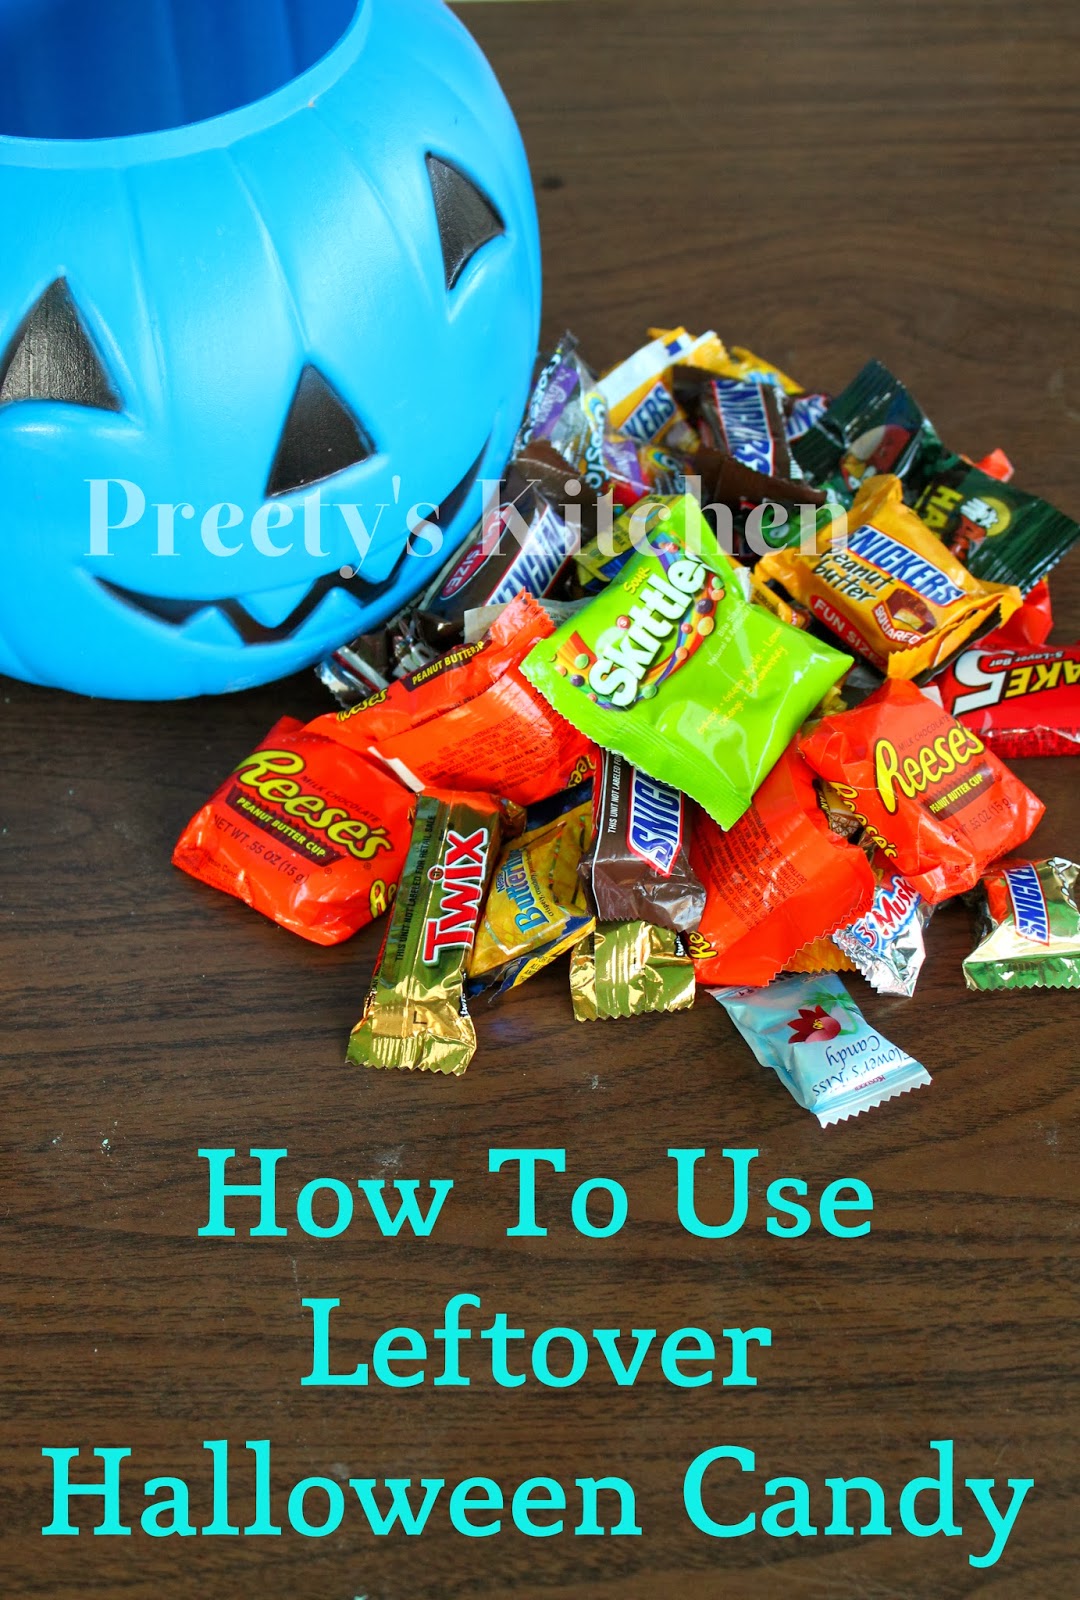 Preety's Kitchen: 15 Creative Ways To Use Leftover Halloween Candy